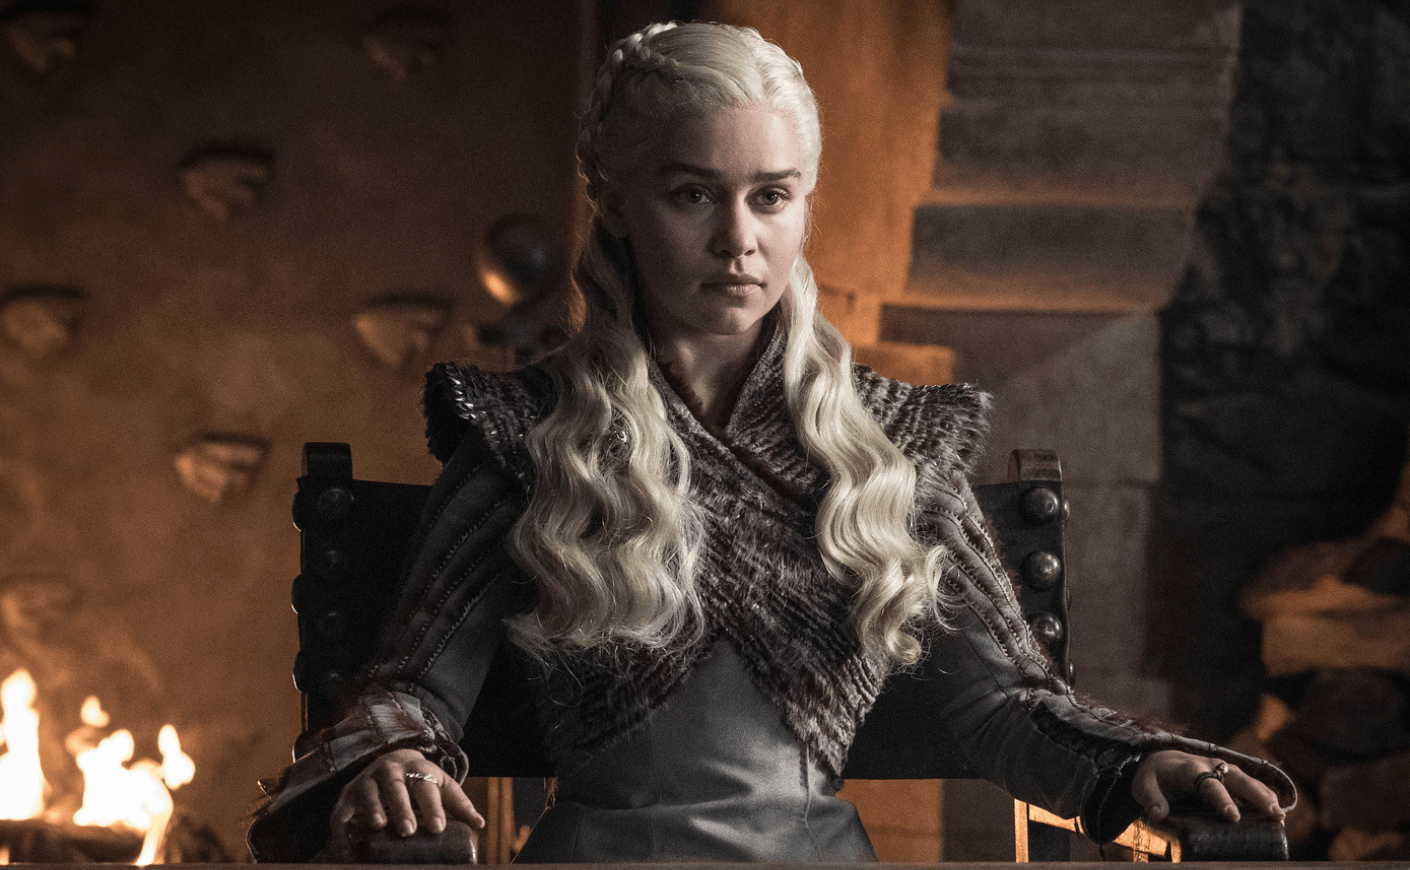 Emilia Clarke from Game of Thrones seated